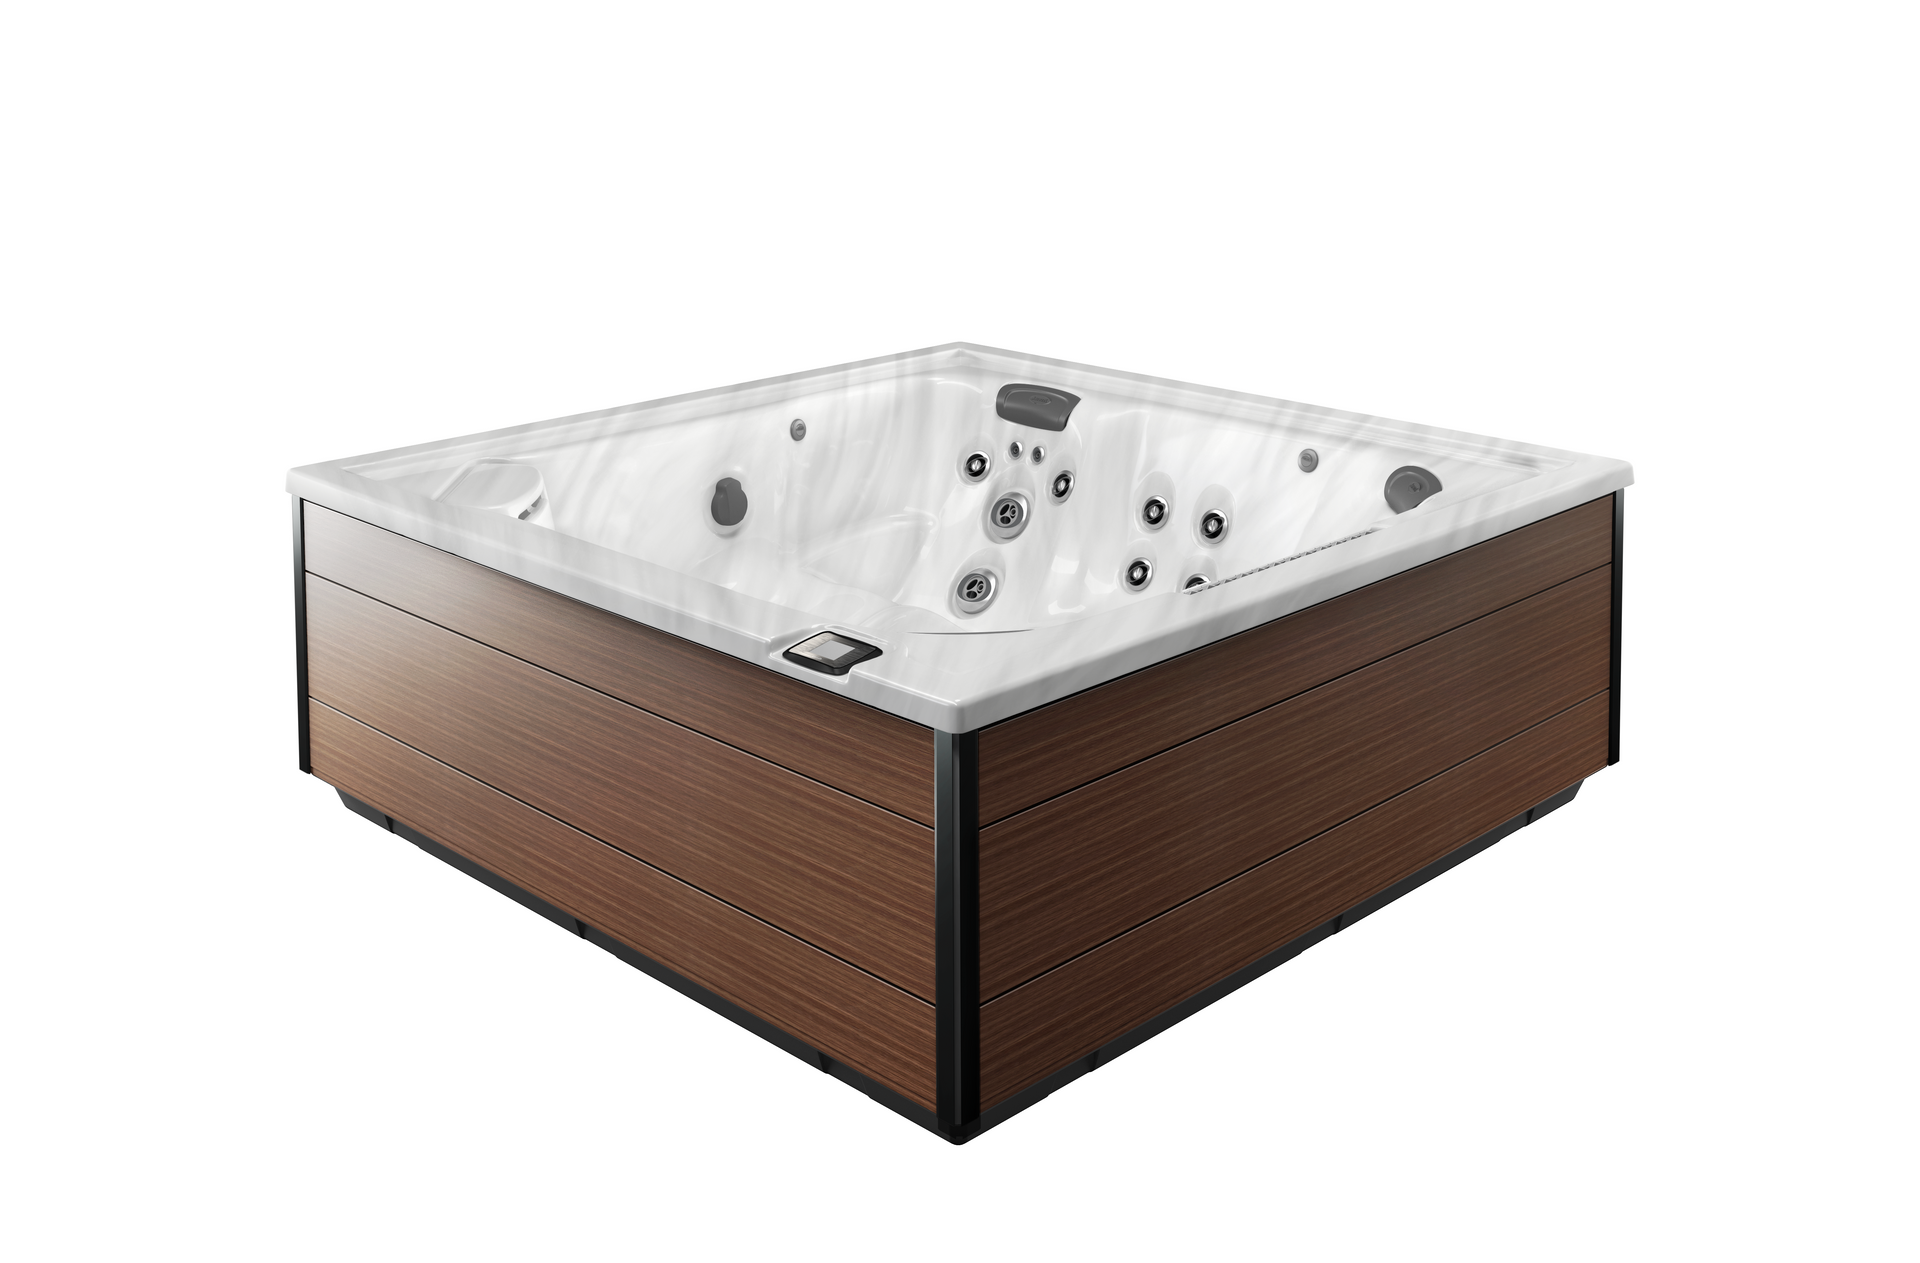 Enjoy Wellness & Relaxation Benefits From The Jacuzzi J-LXL